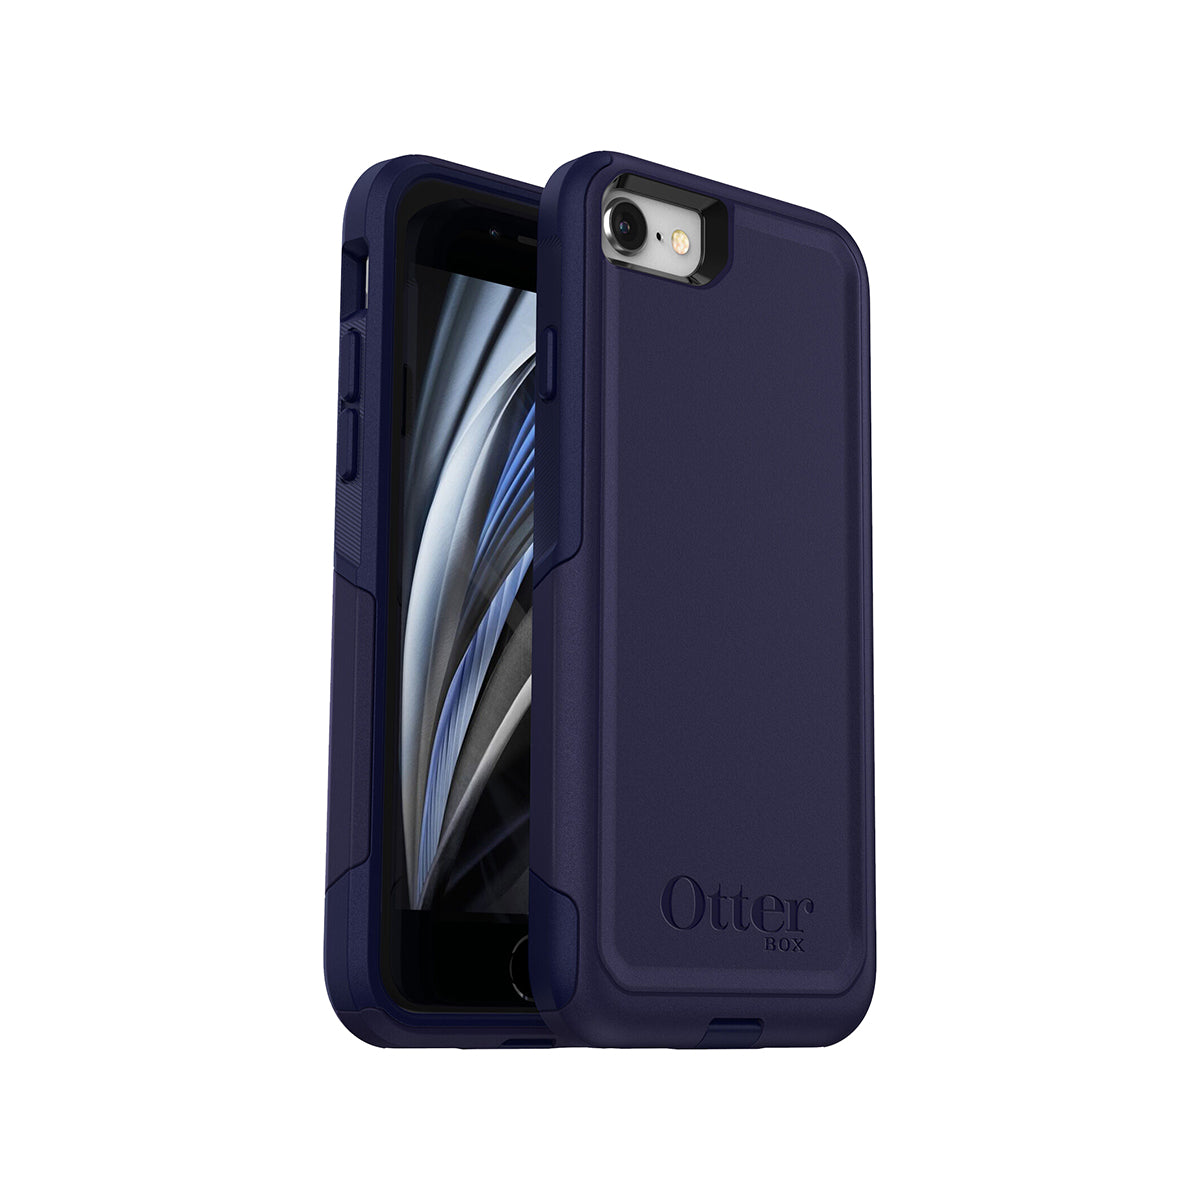 Otterbox Commuter Phone Case for iPhone 7/8 - Indigo Way.